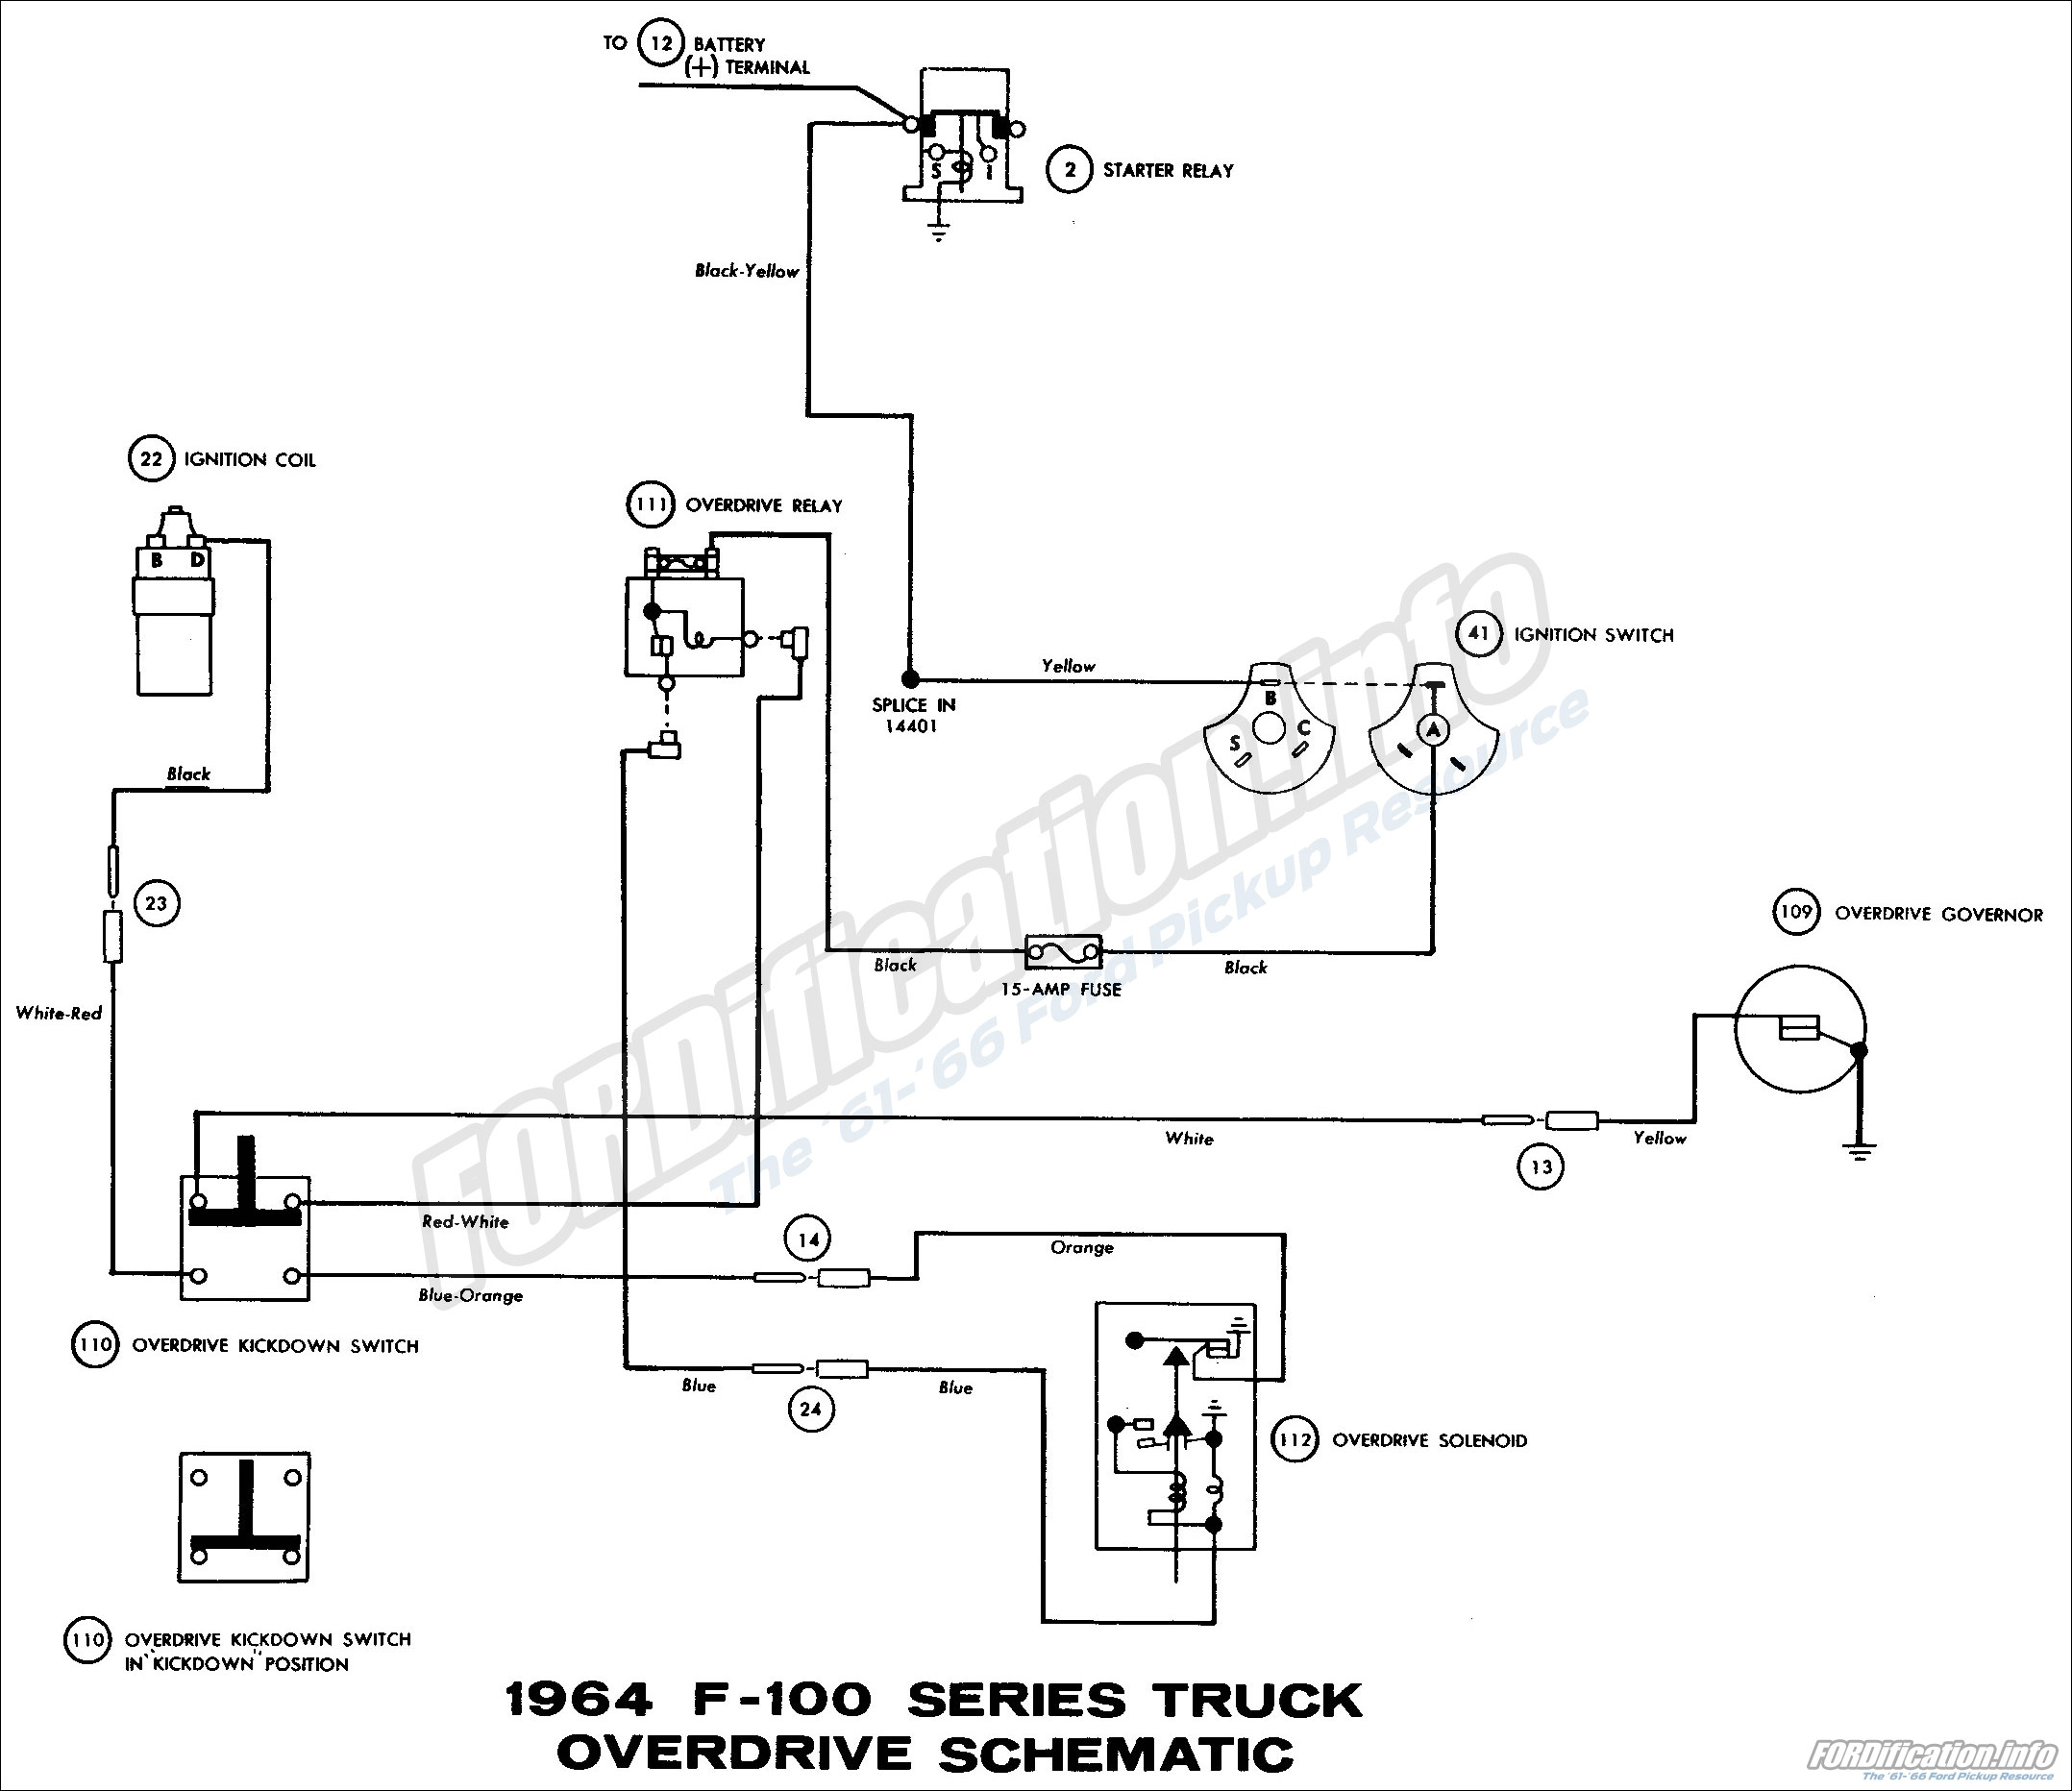 1964 Ford Truck Wiring Diagrams - FORDification.info - The ... eaton generator wiring schematics 